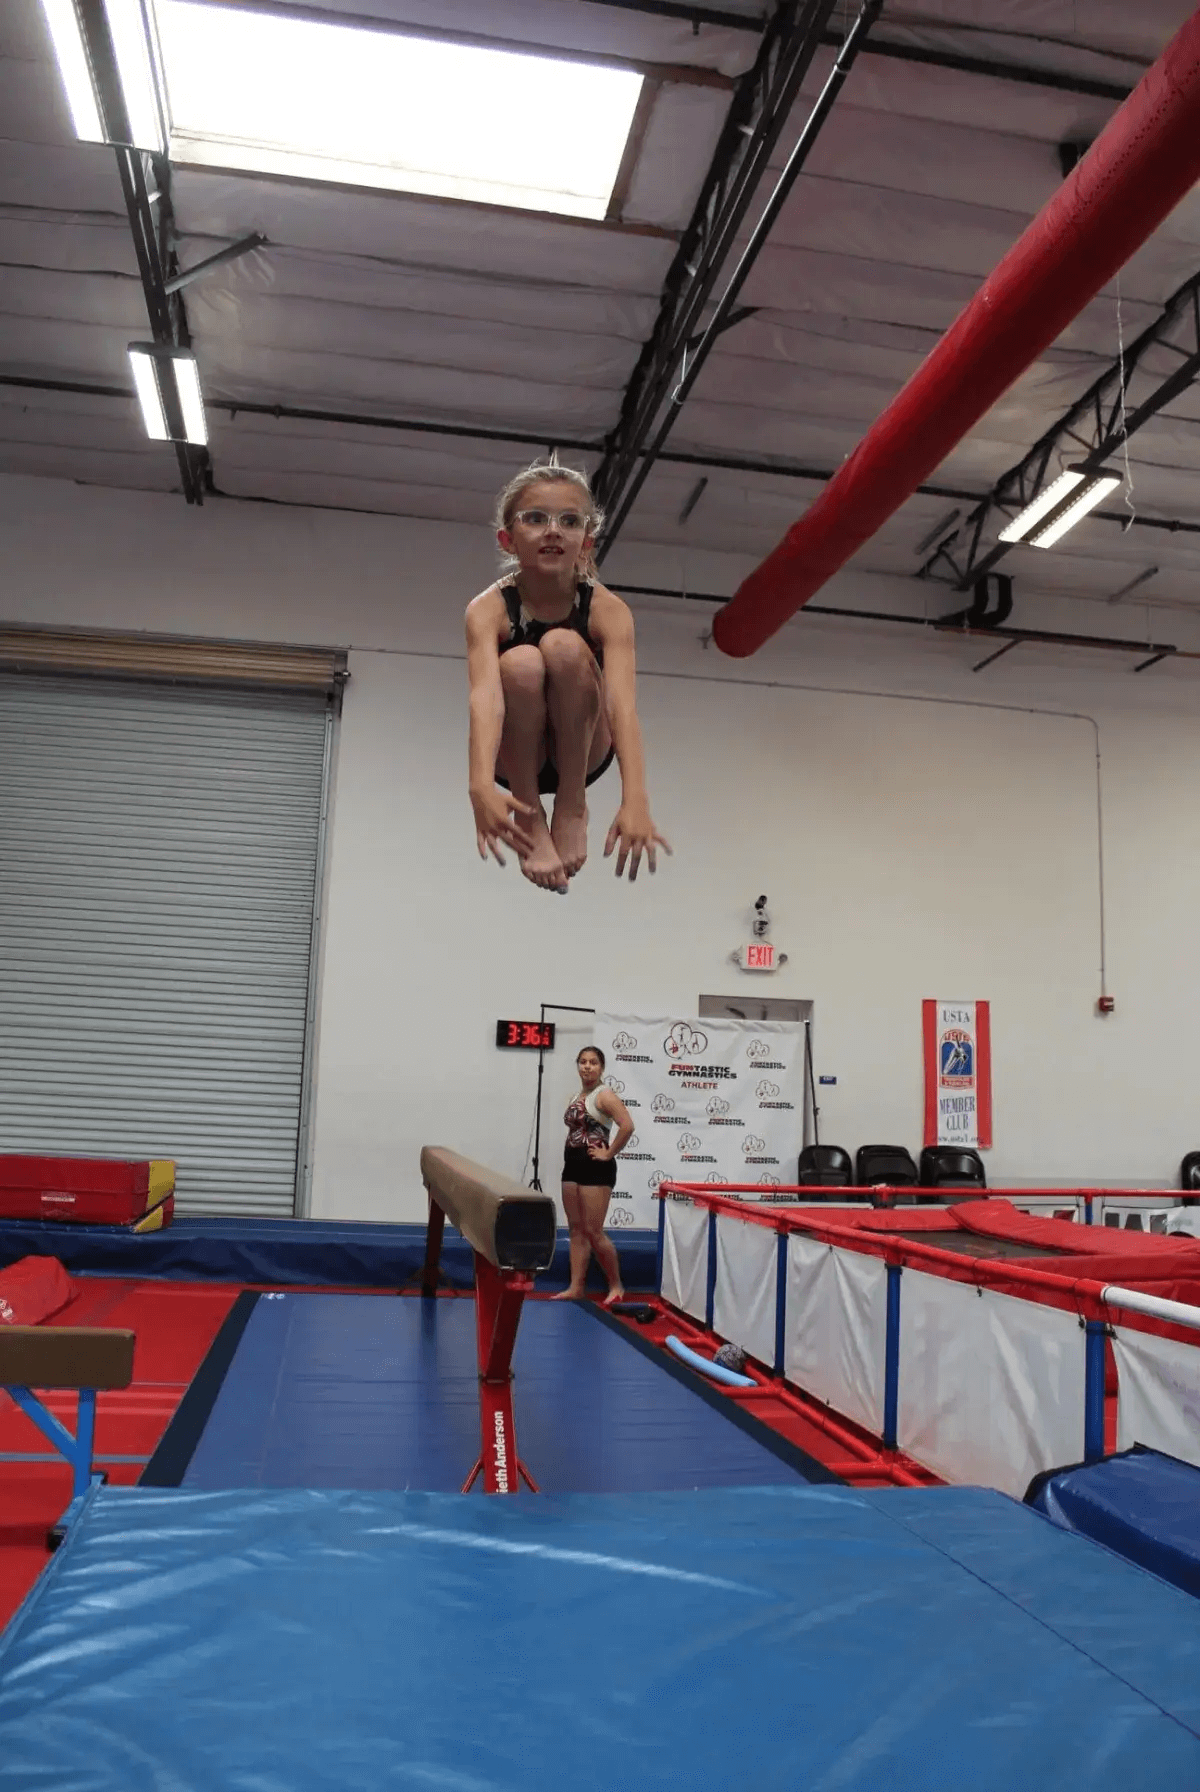 A girl is jumping in the air on a trampoline.